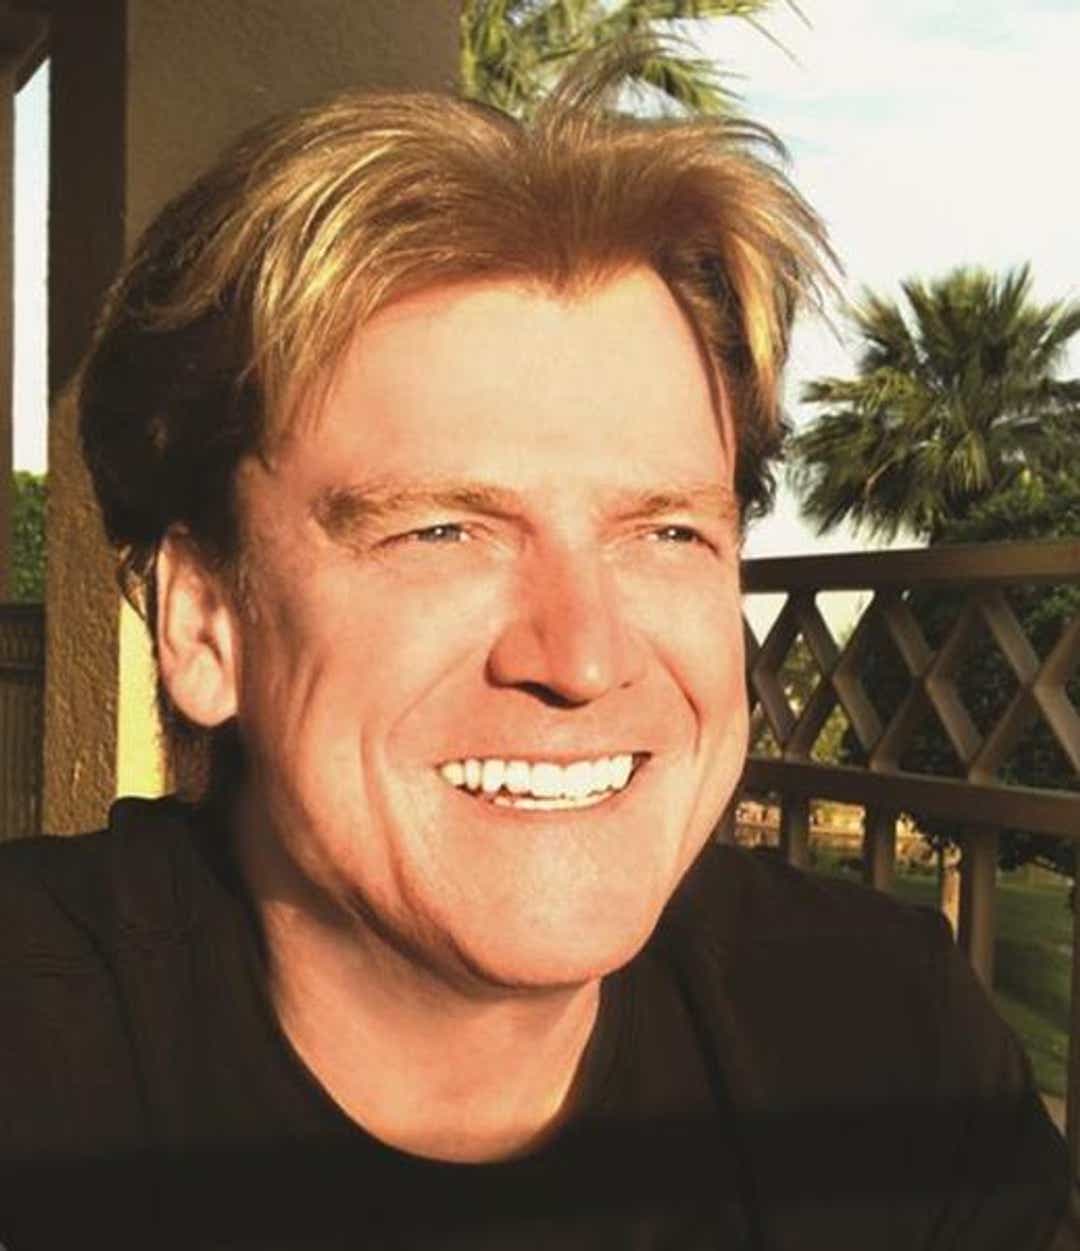 Overstock CEO resigns after saying he helped political investigations